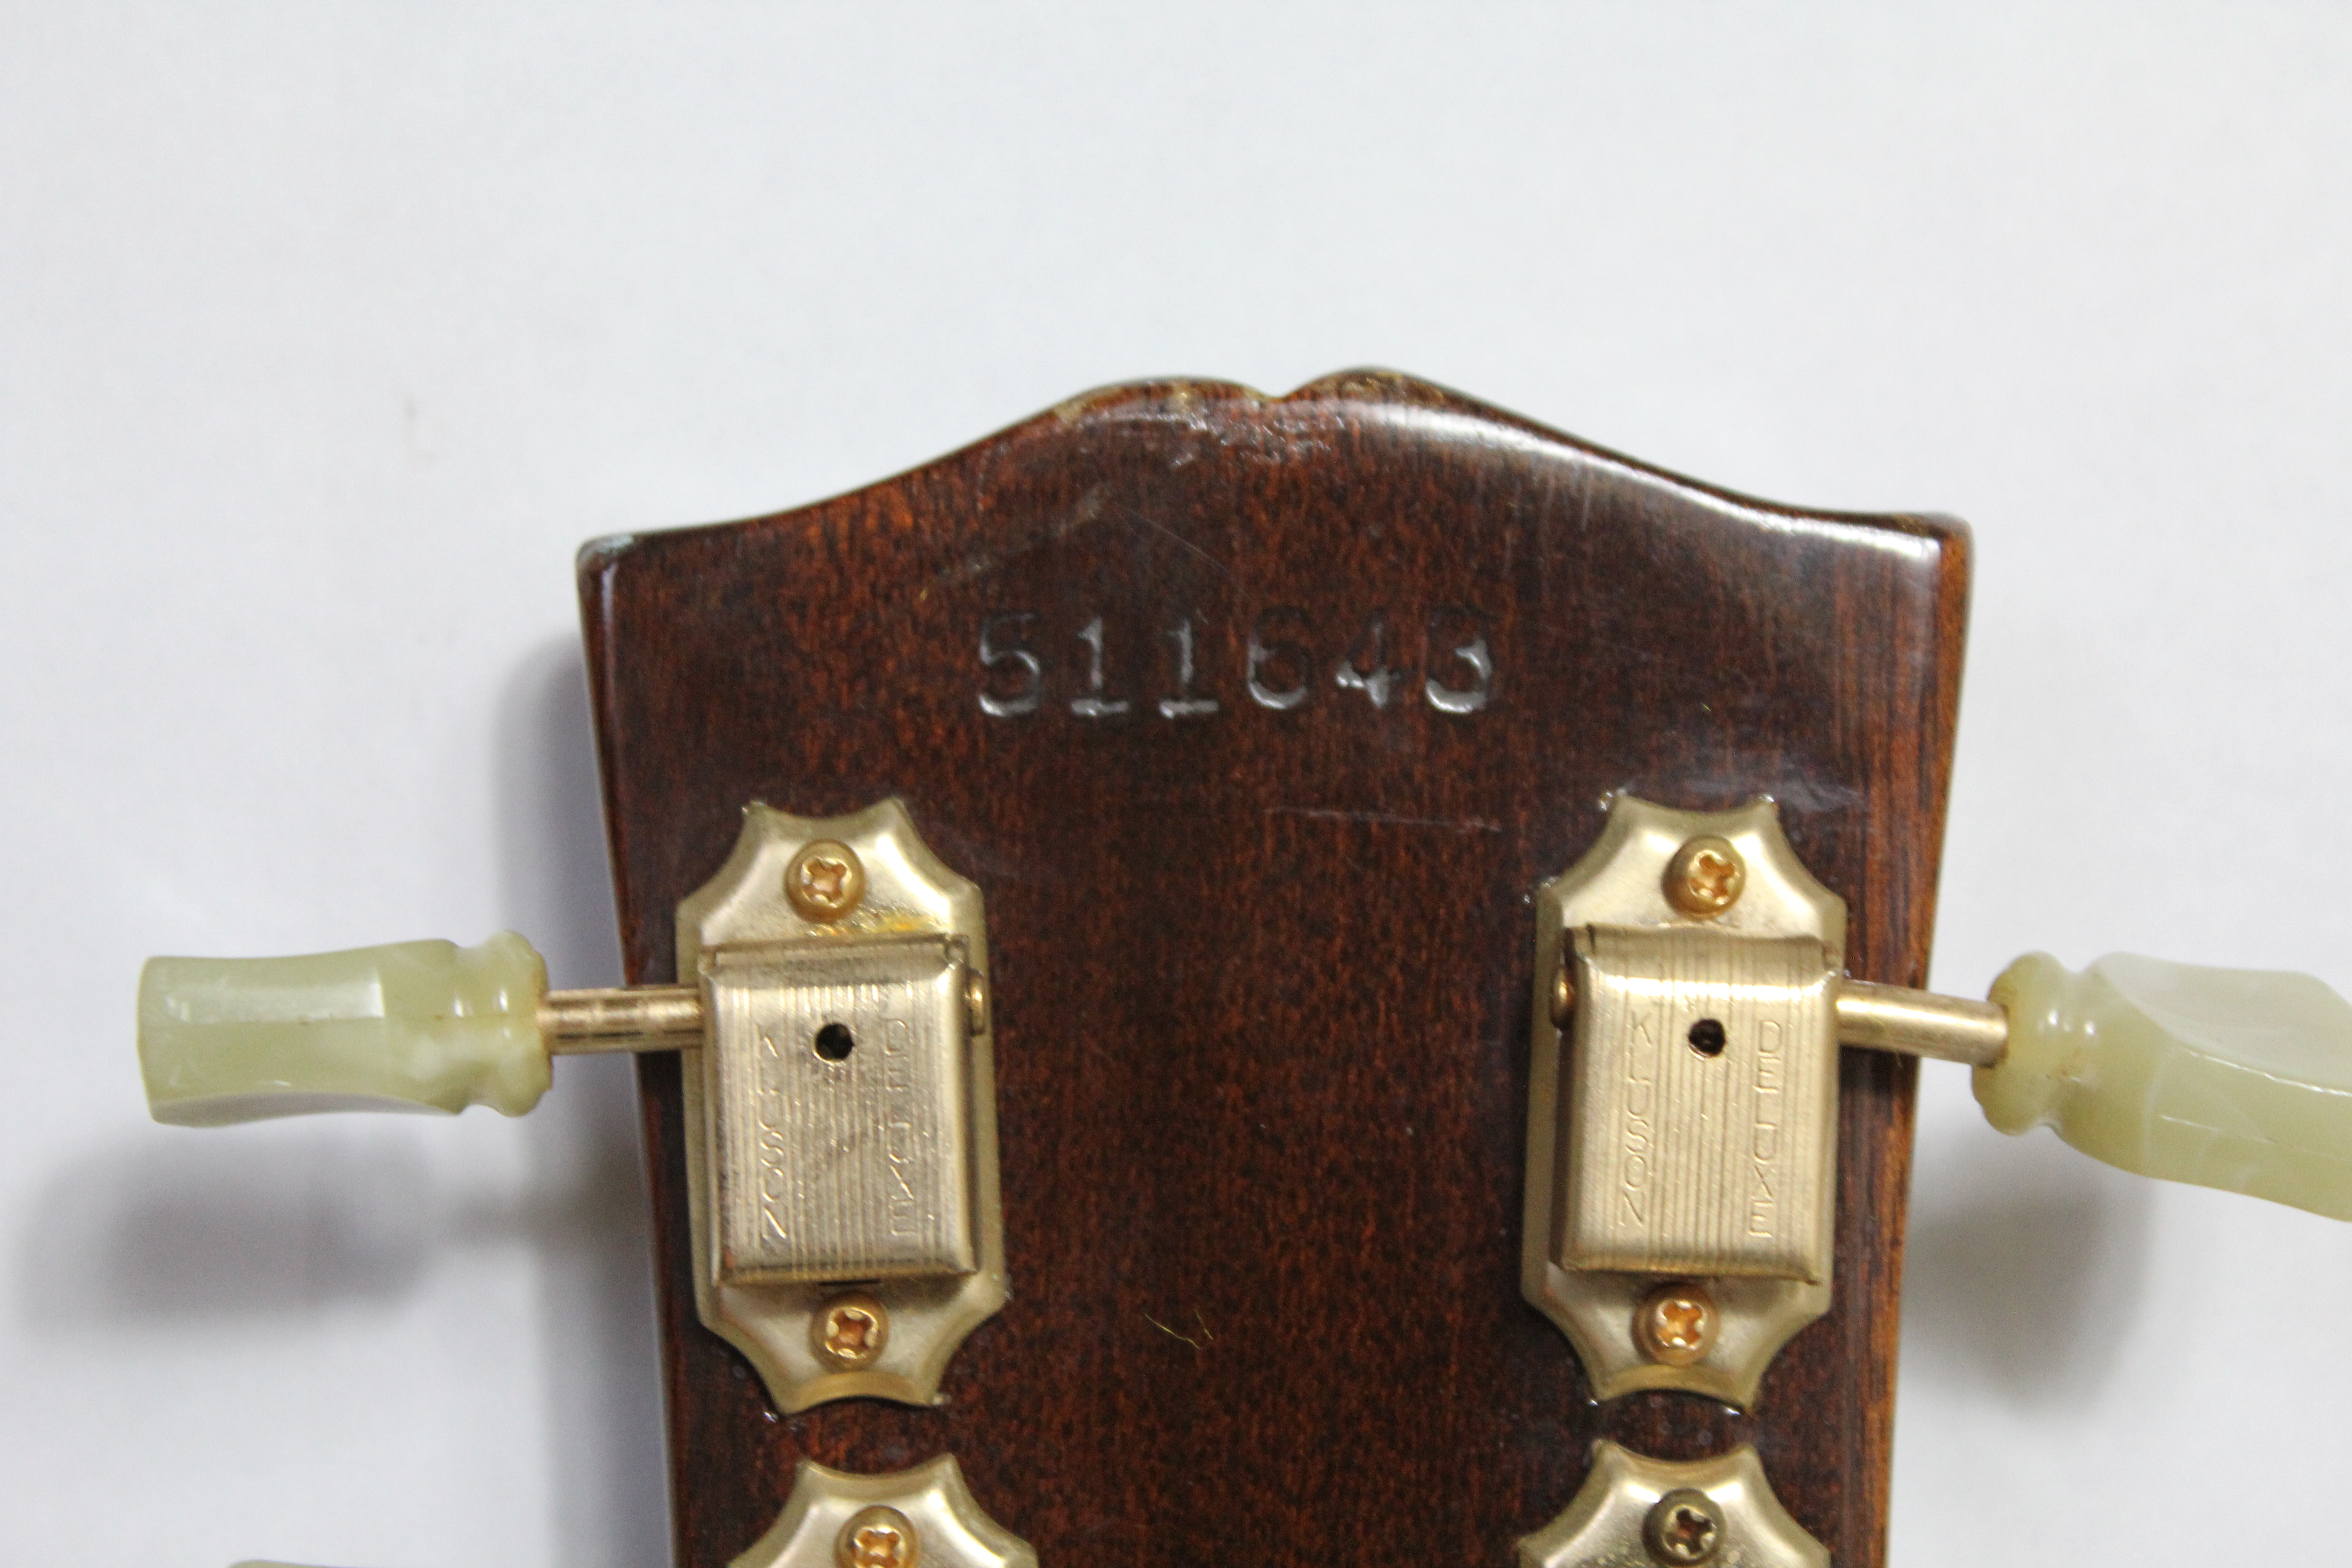 GIBSON, A VERY RARE ES 345 STEREO GUITAR, CIRCA 1965 (Minimum play), complete with hang tags, - Image 25 of 28